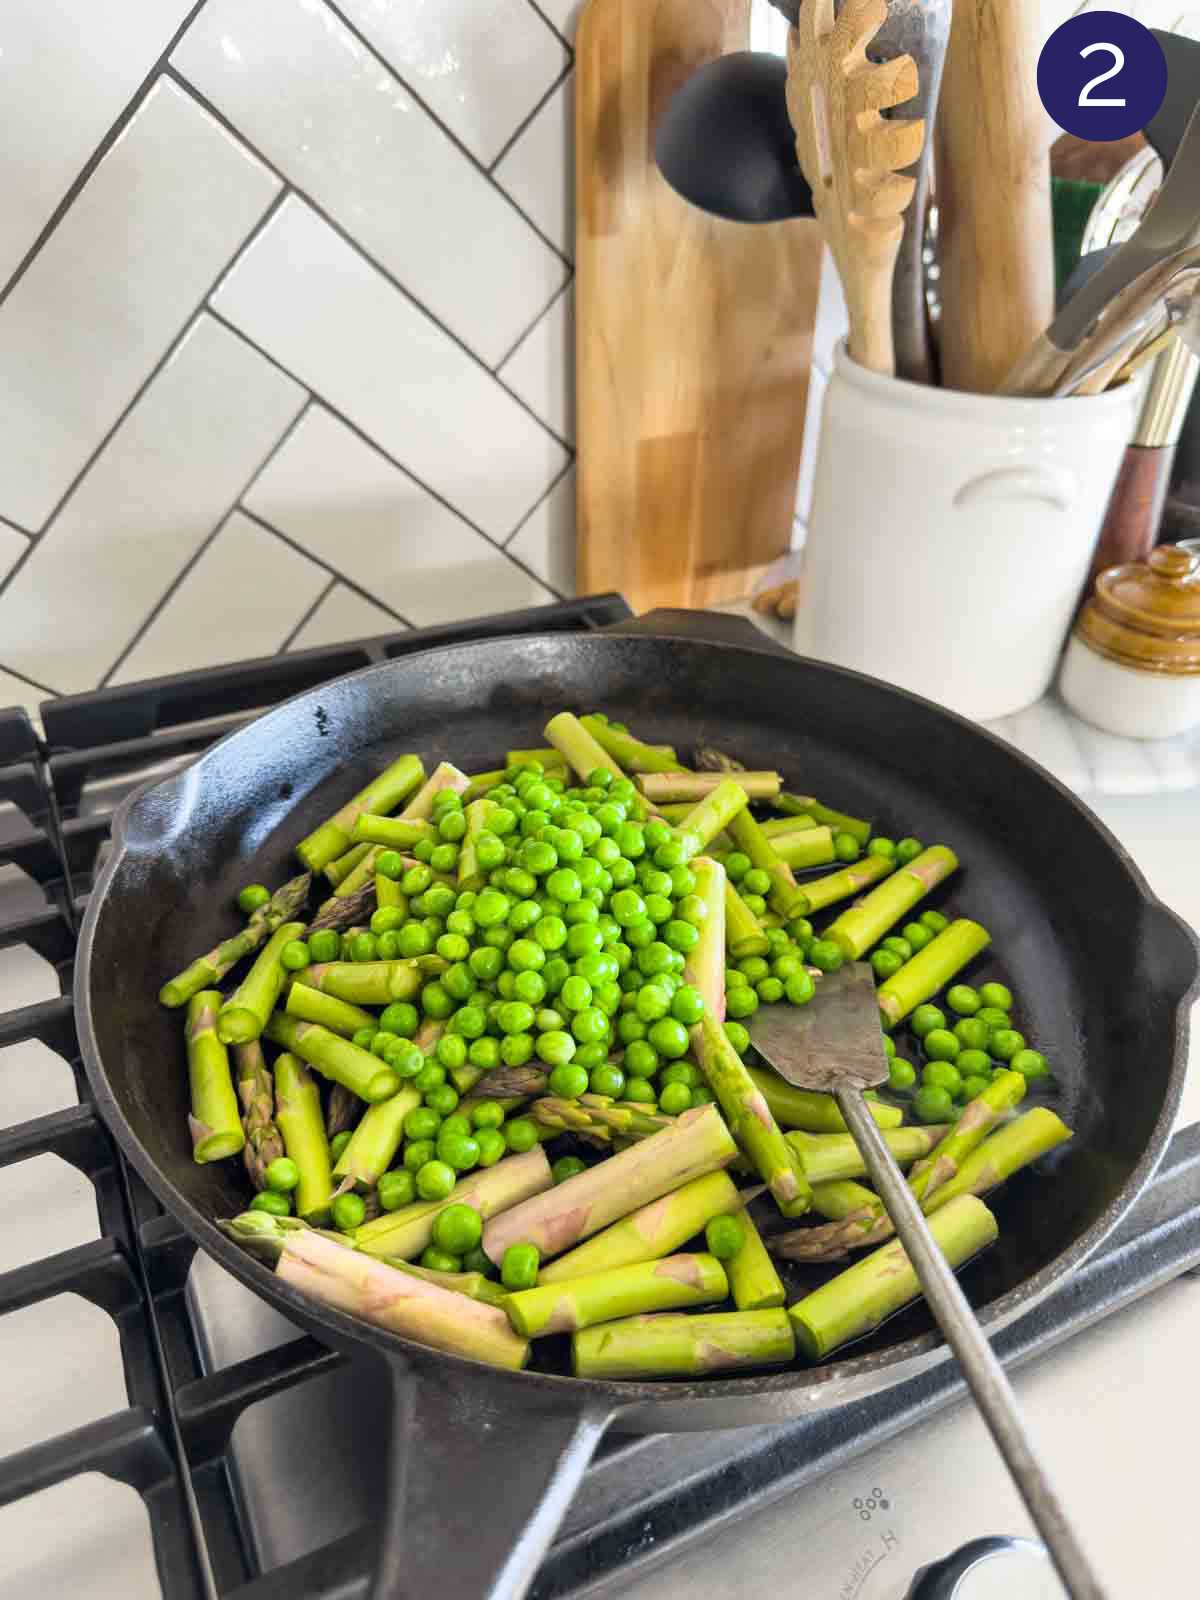 Sautéing green peas and asparagus in a cast iron pan with a metal spatula.